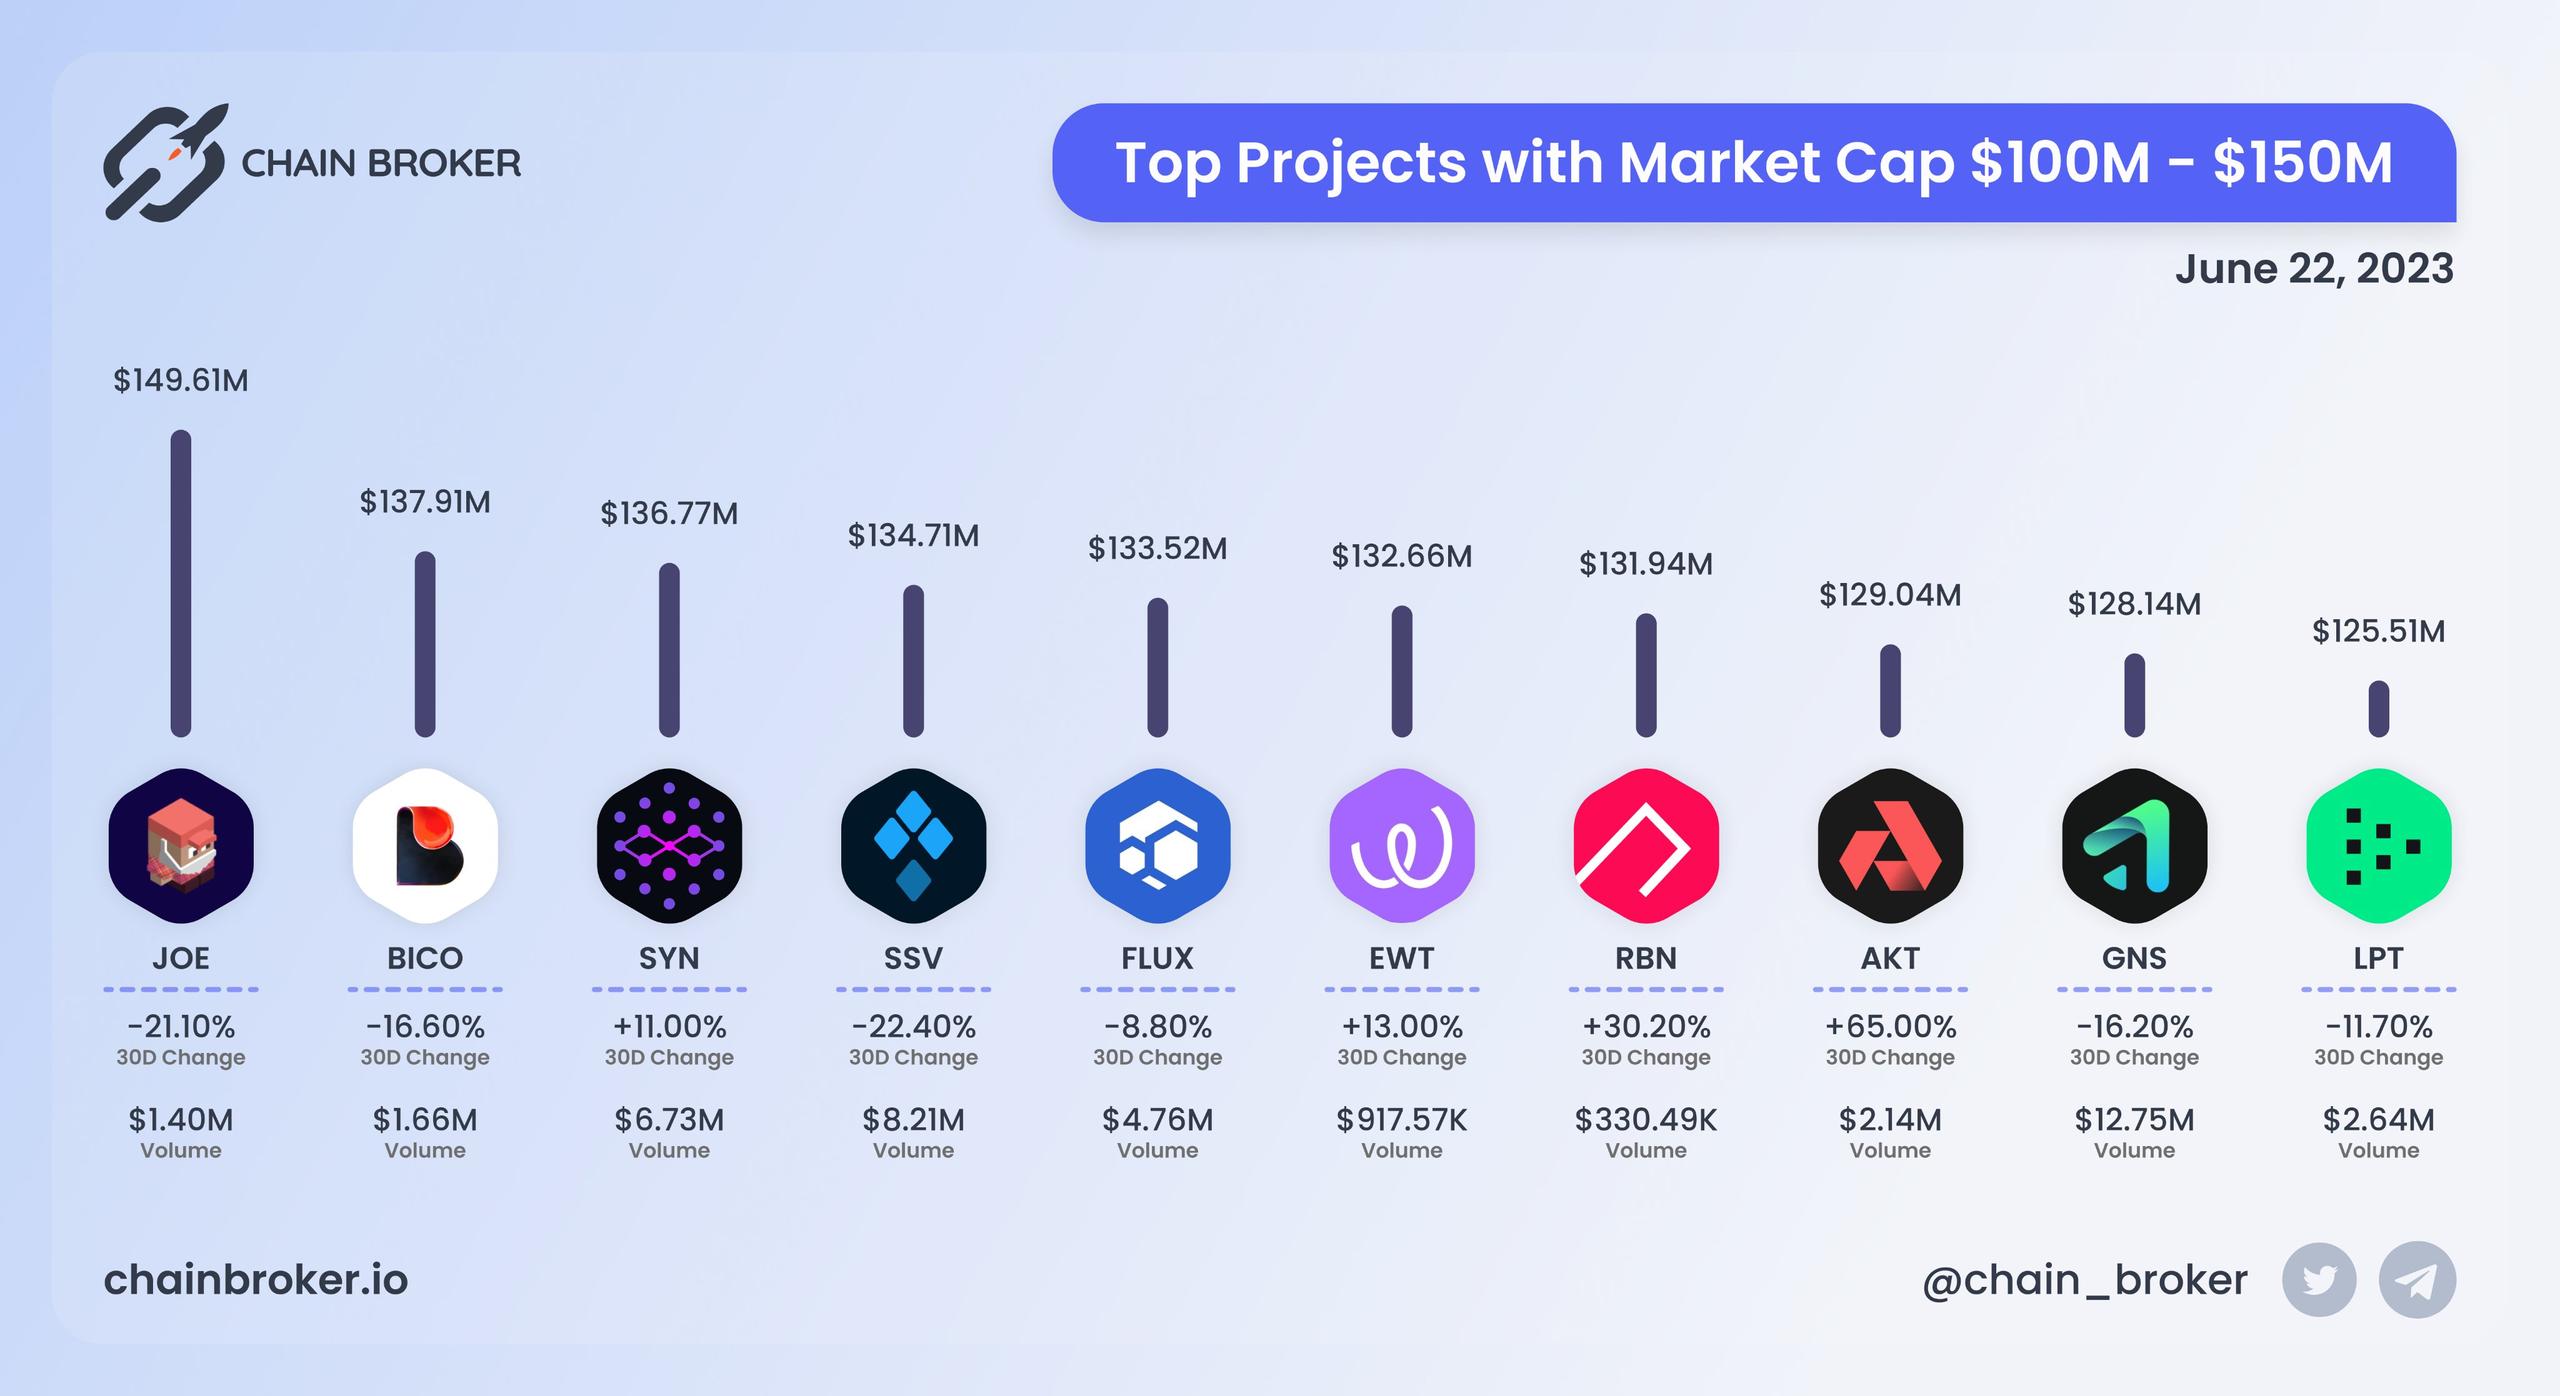 Top projects with Market Cap $100M - $150M